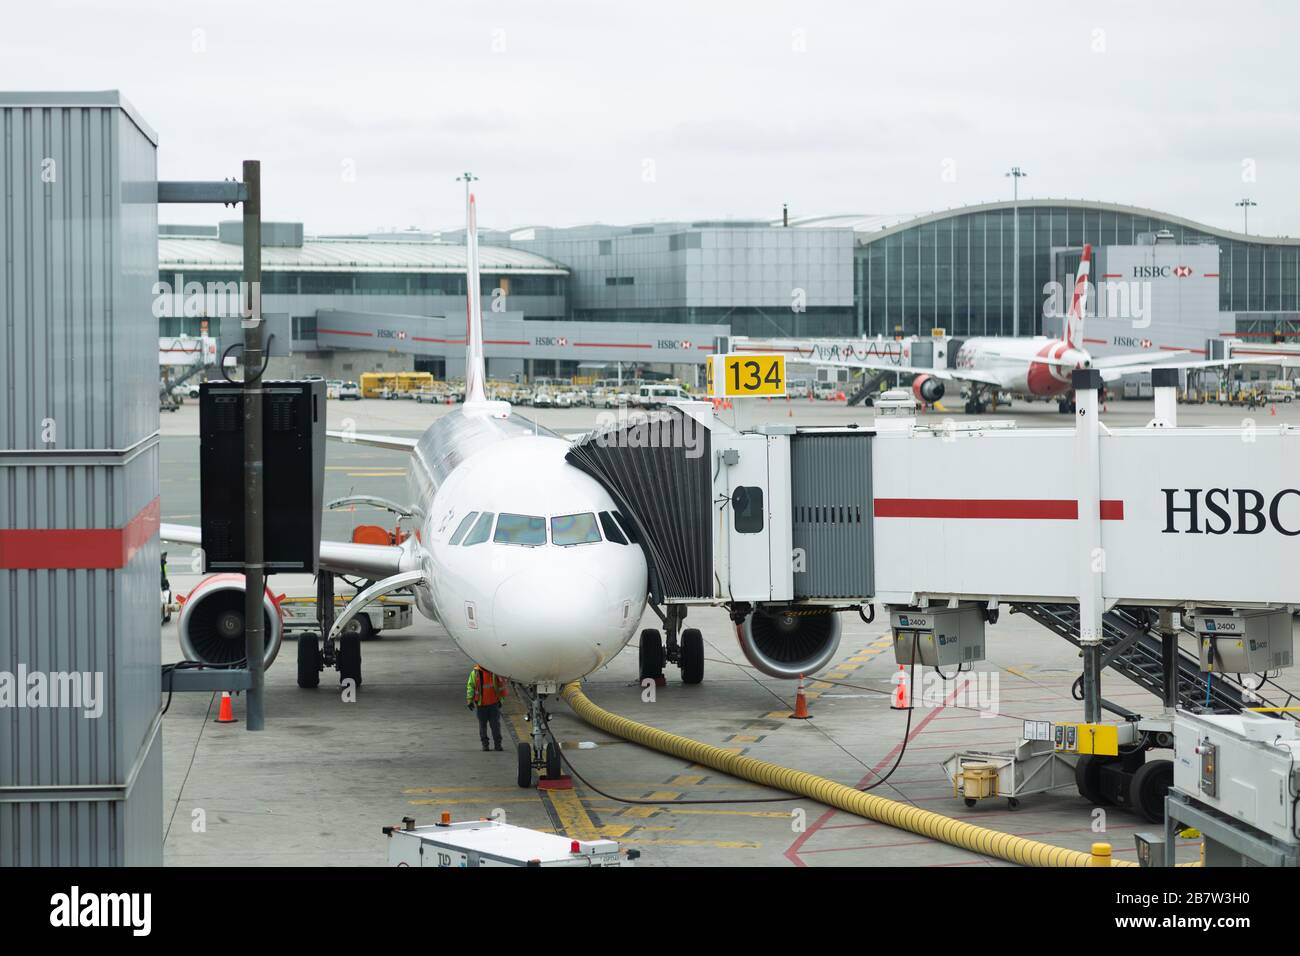 A colour landscape image showing a passenger jet at the gate at an airport. Stock Photo